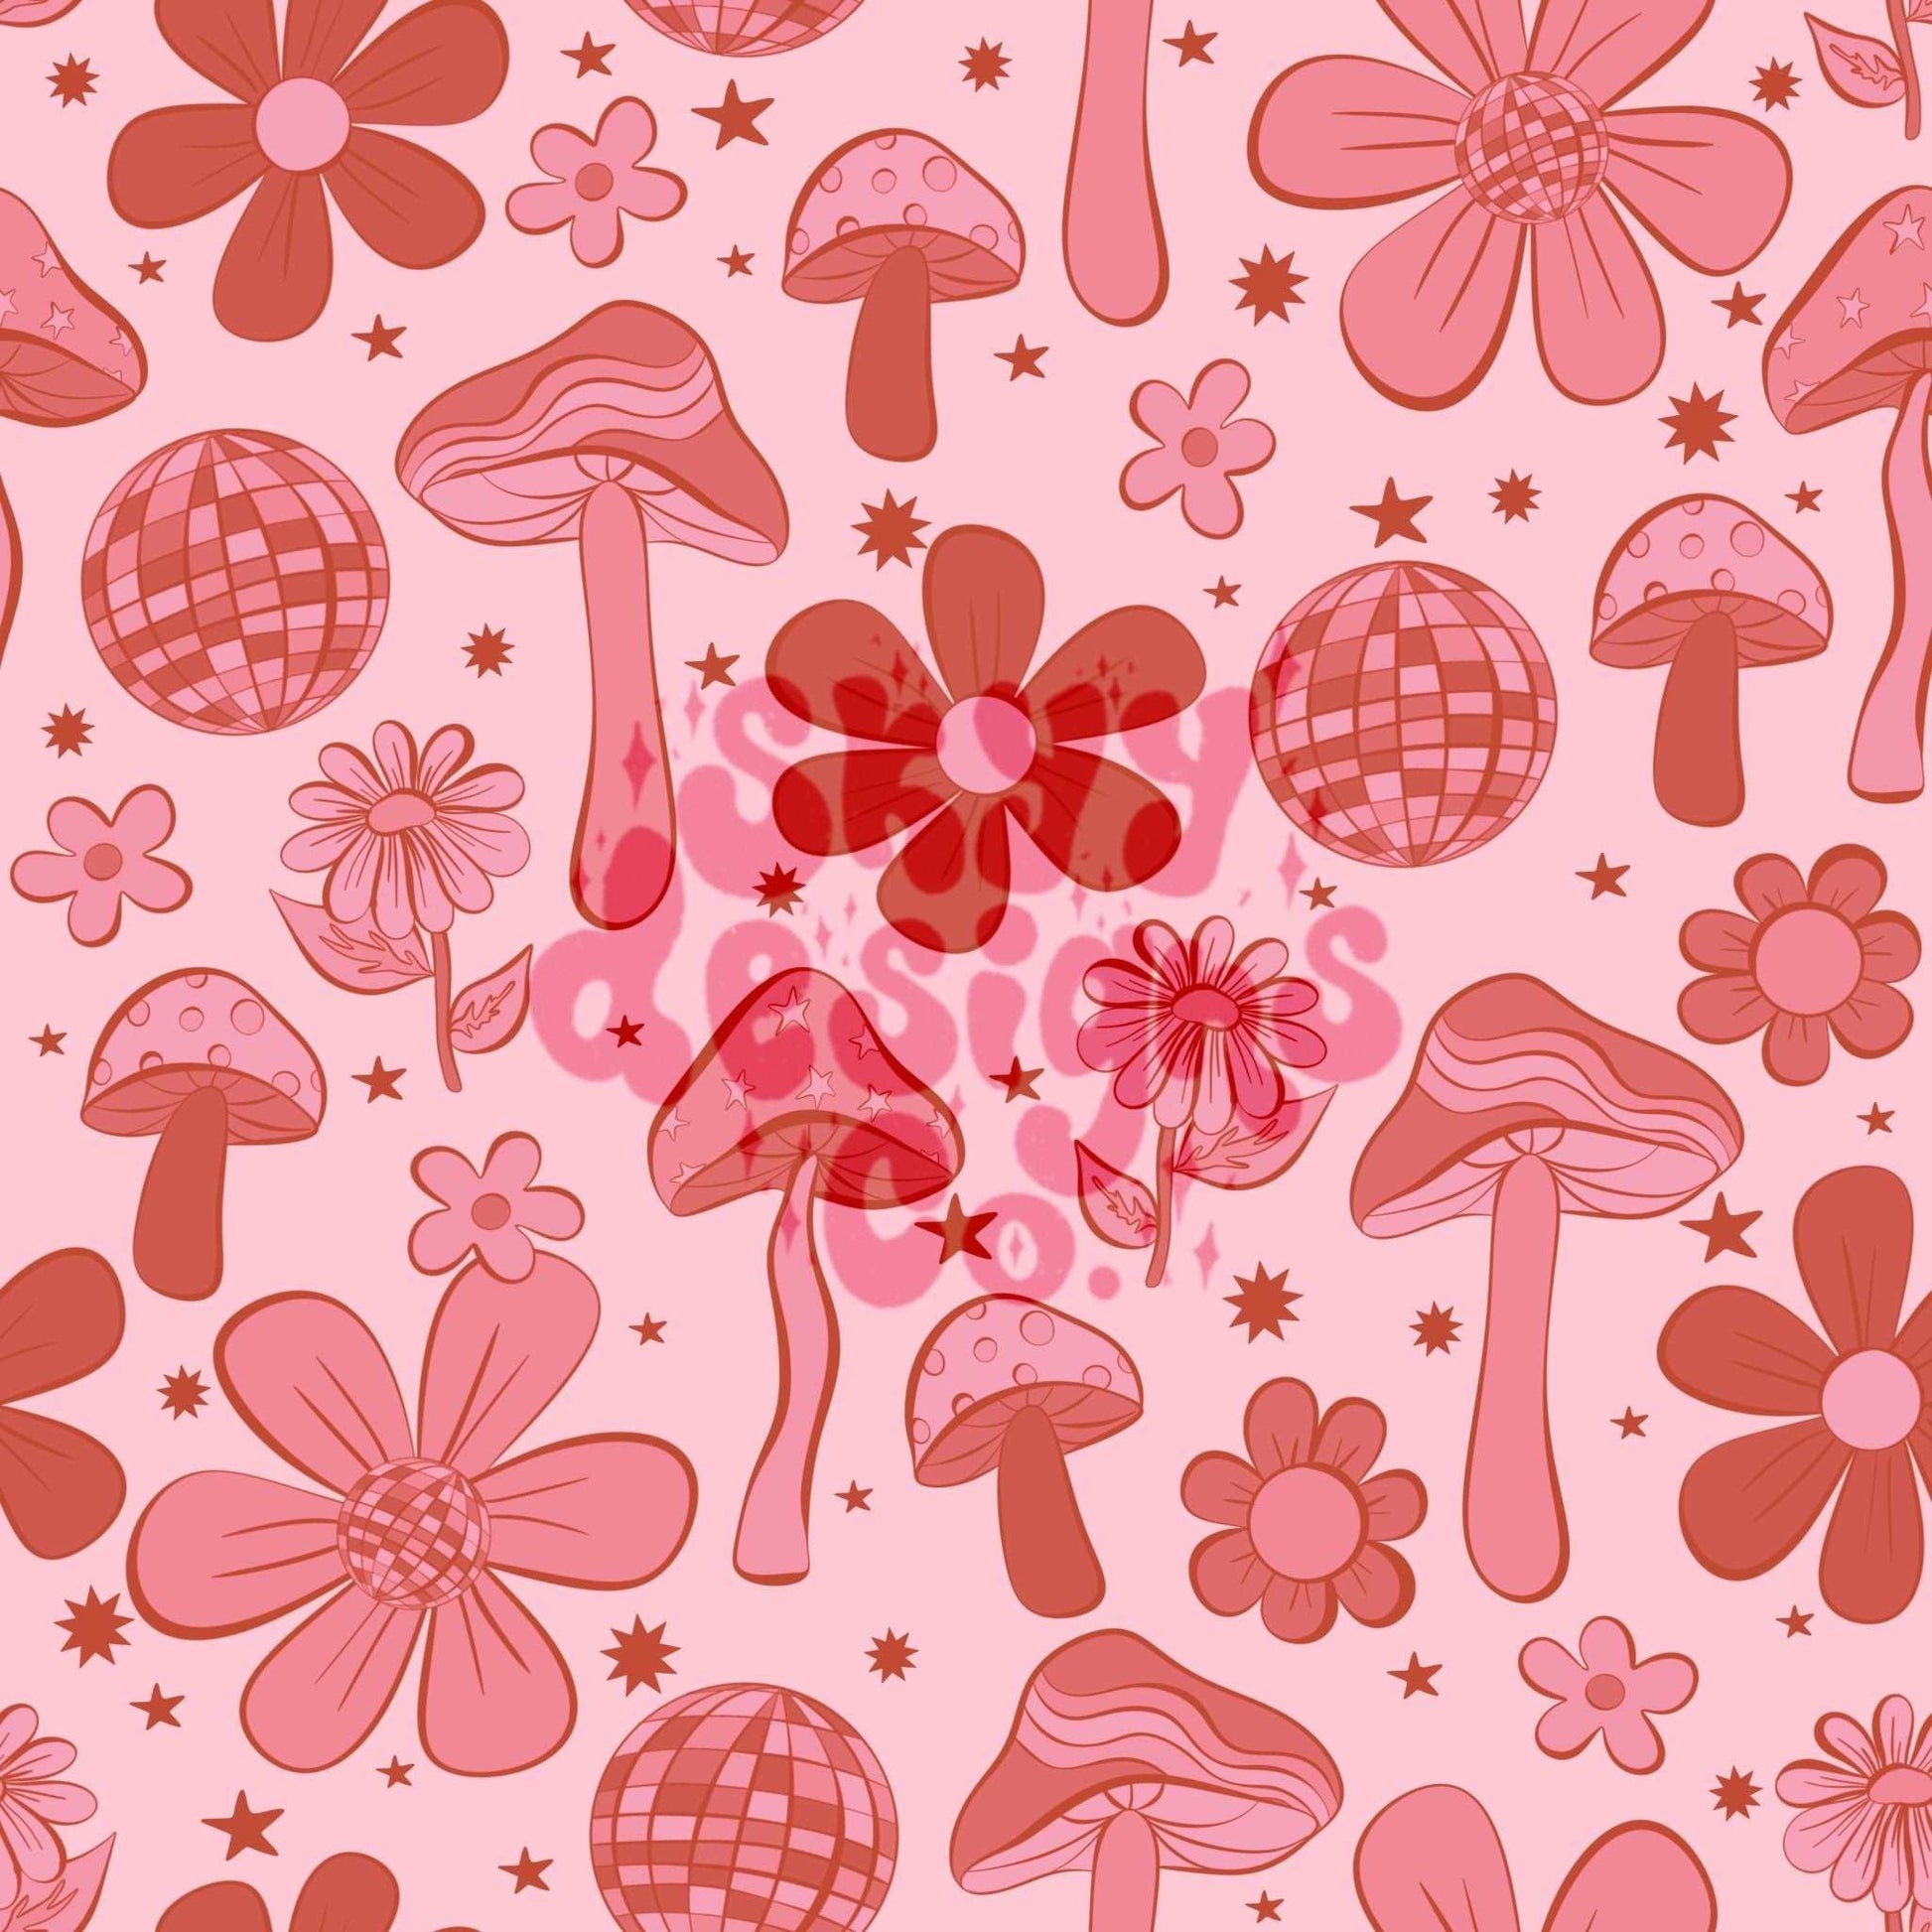 Retro groovy red and pink seamless repeat pattern - SkyyDesignsCo